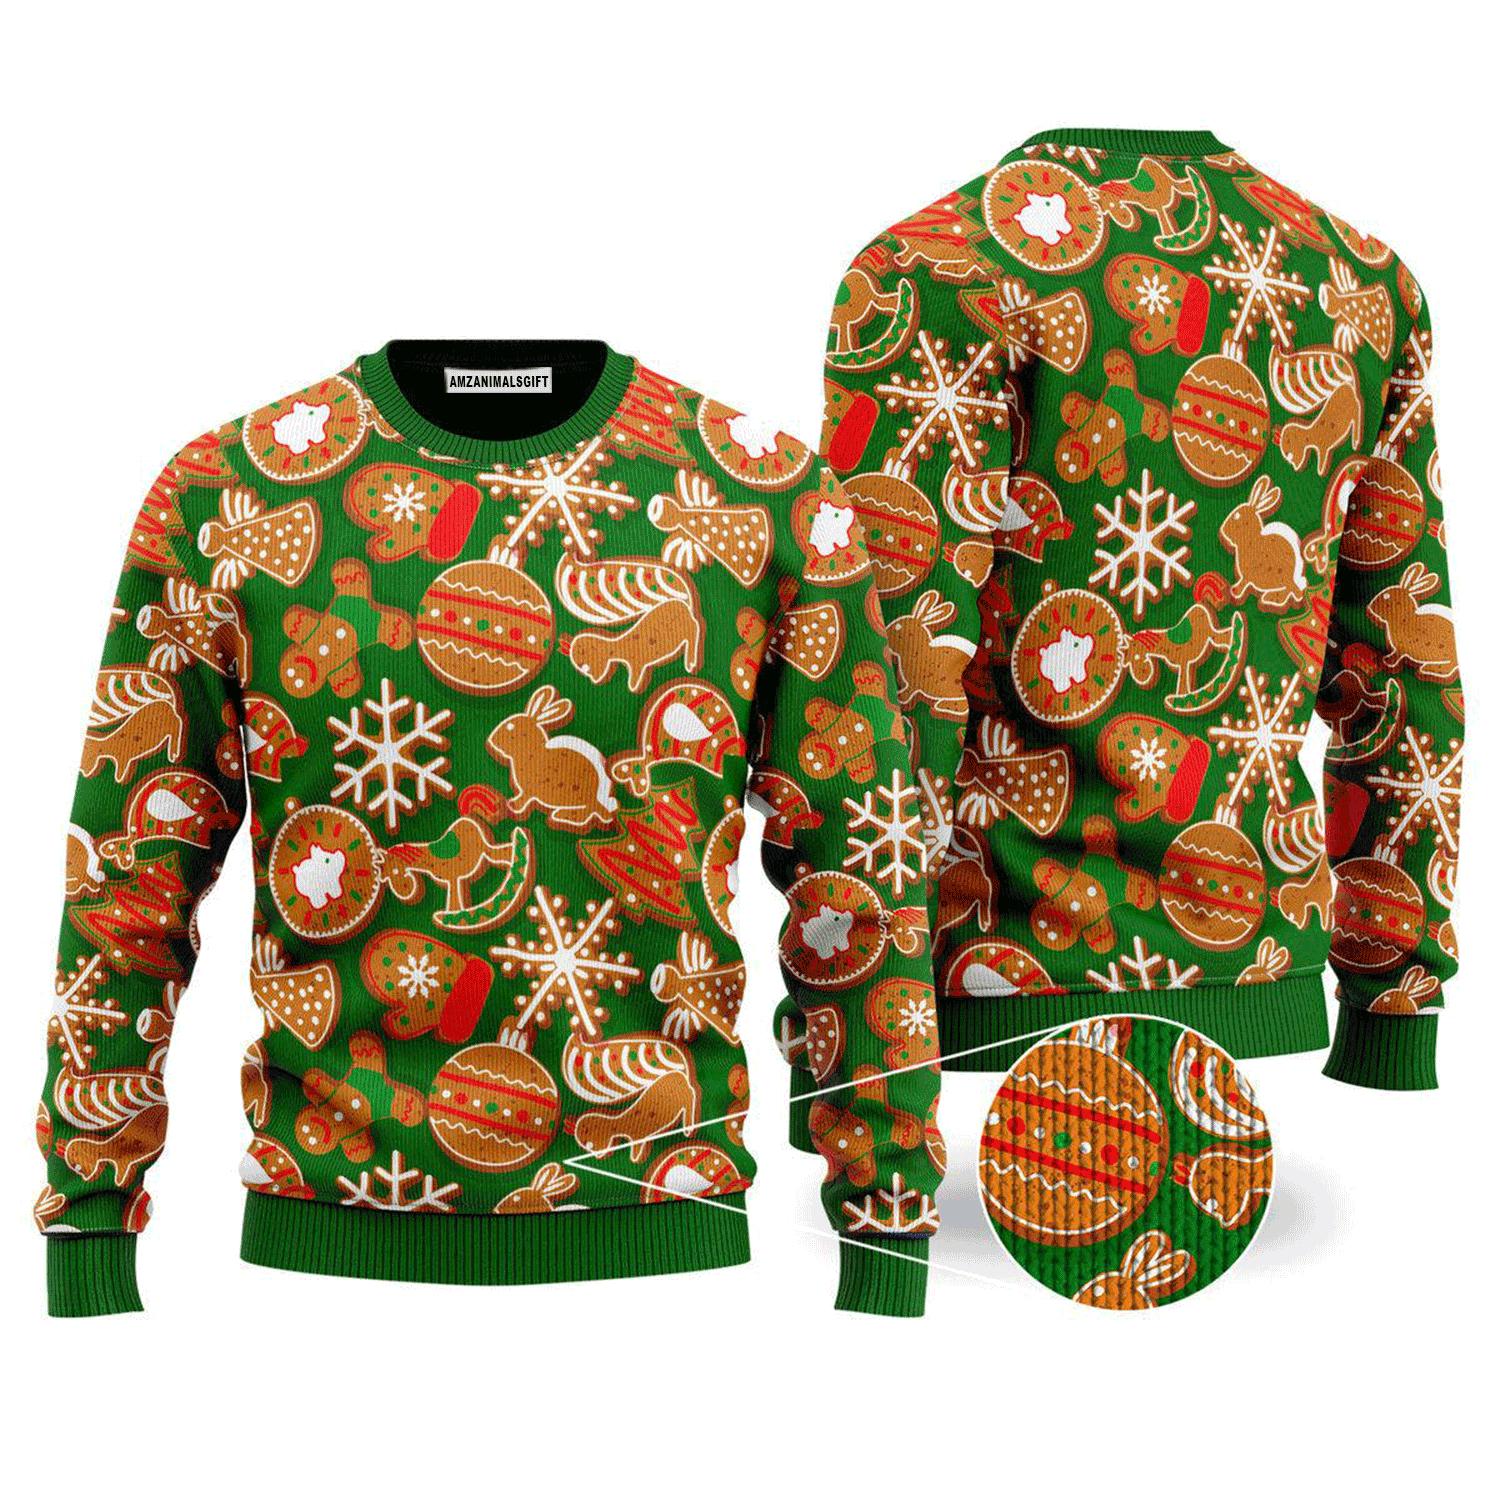 My Ginger Biscuits My Christmas Sweater, Ugly Sweater For Men & Women, Perfect Outfit For Christmas New Year Autumn Winter